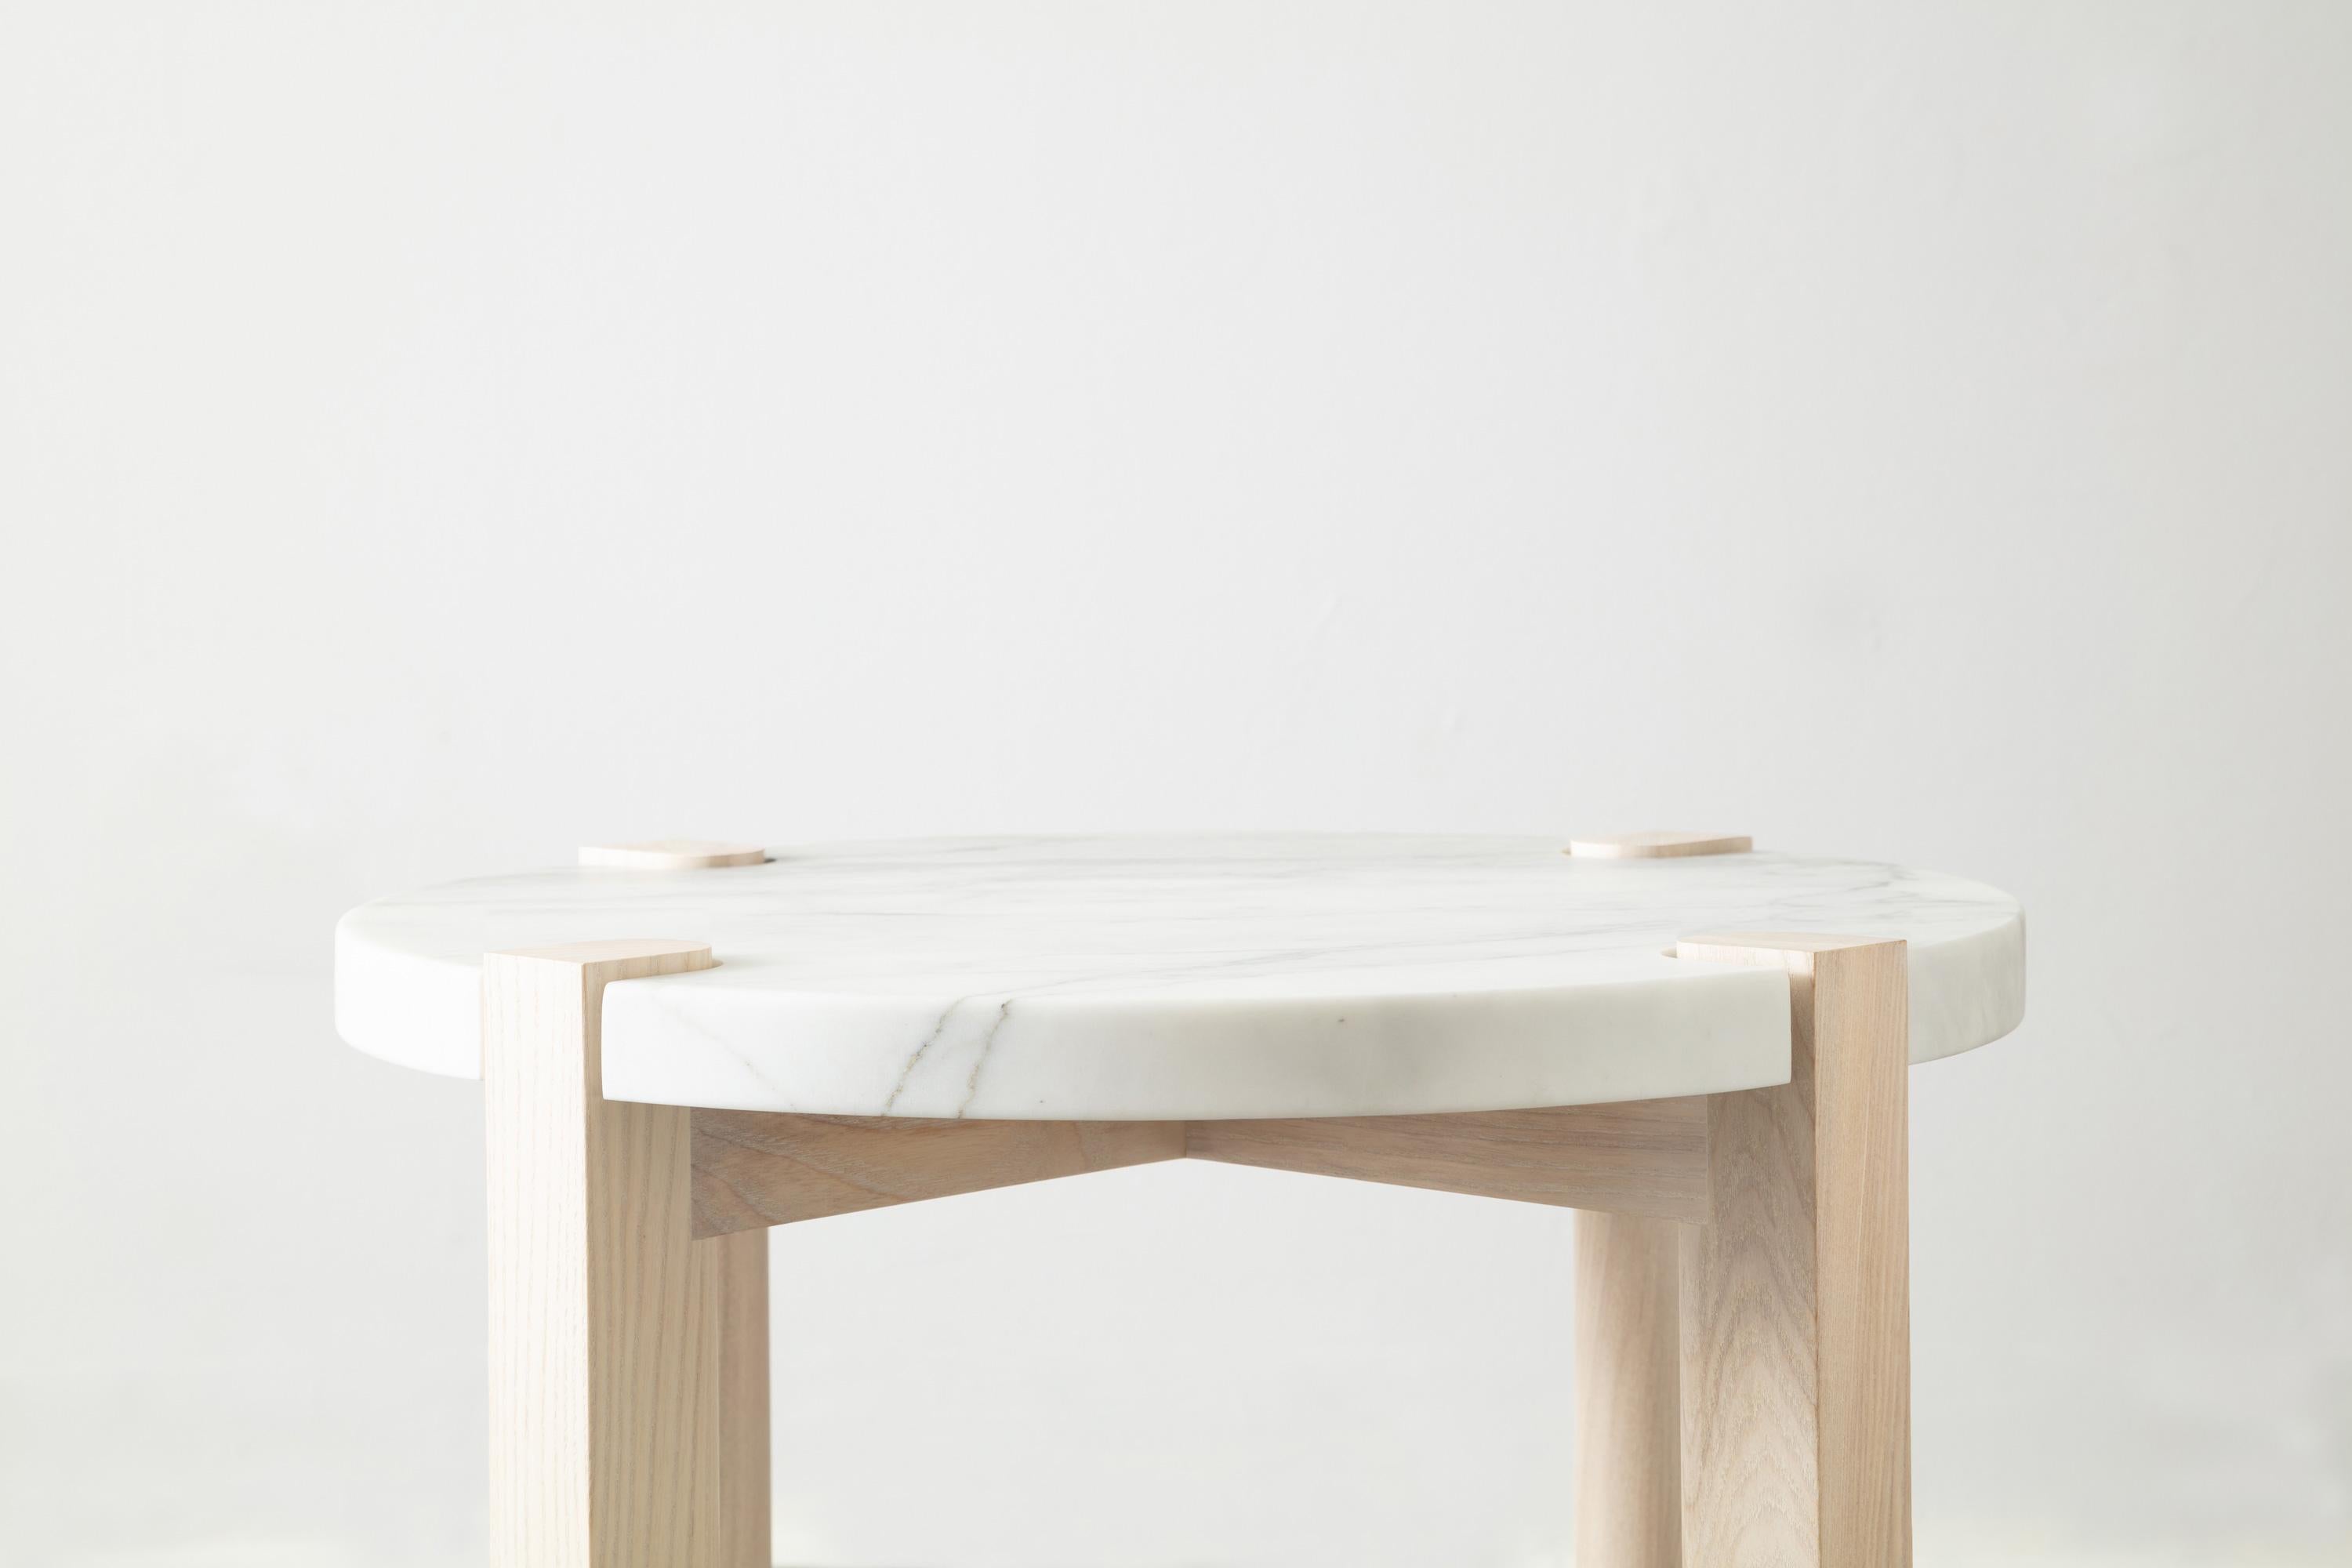 Hand-Crafted Pierce Side Table – Handmade in Solid Wood with Marble Top